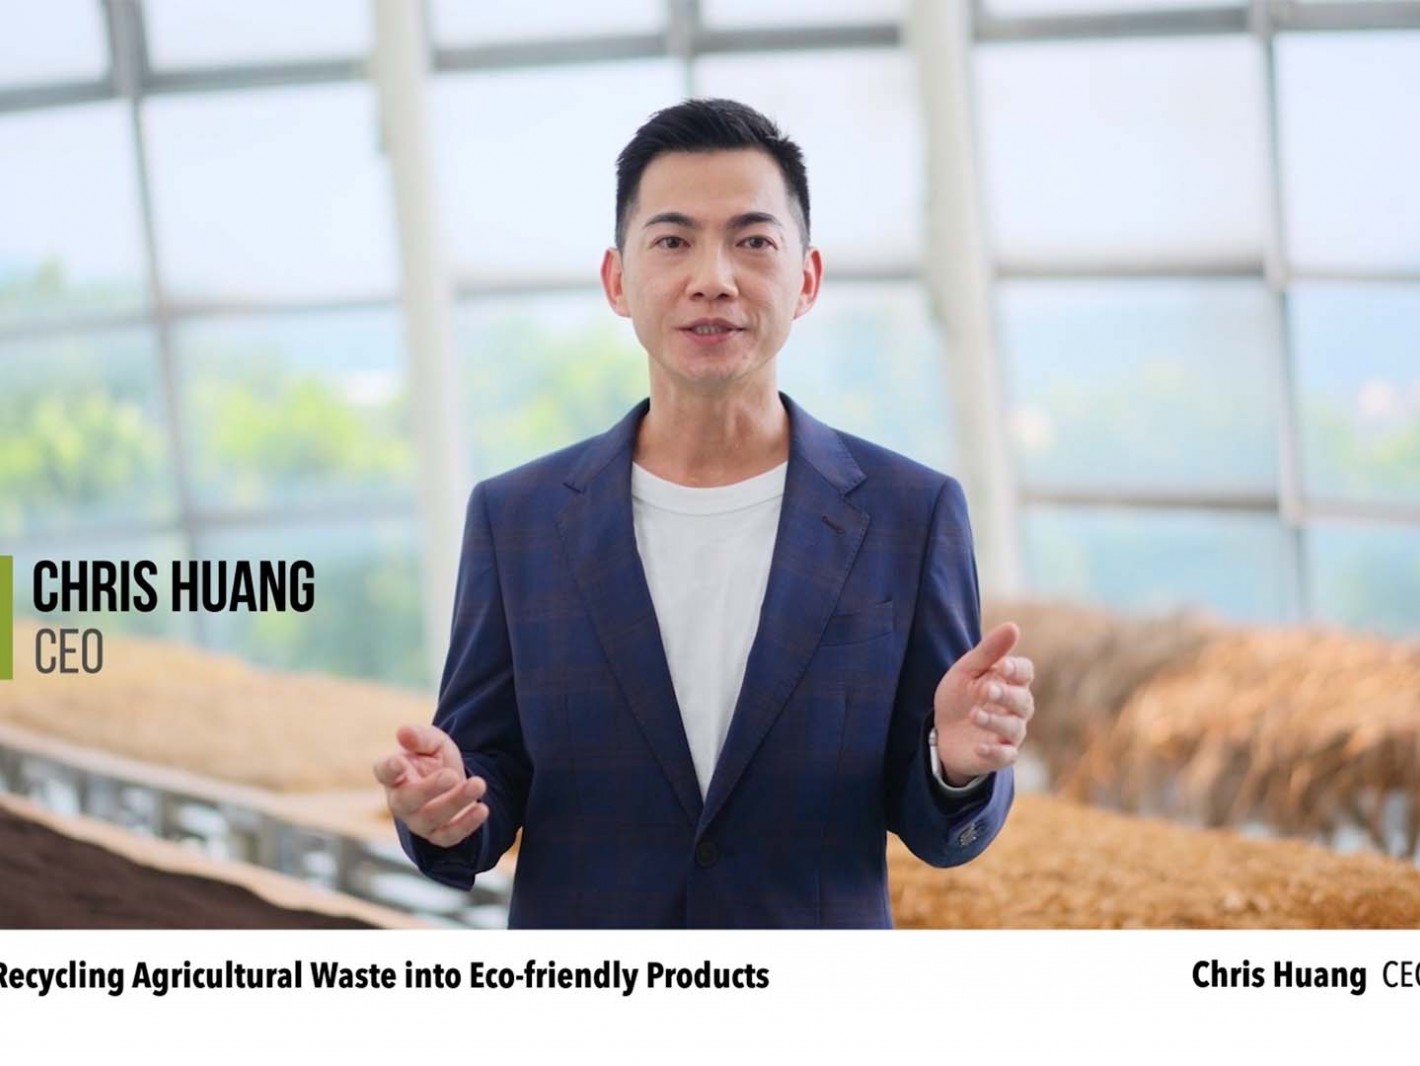 Chris Huang, CEO, JuTian Cleantech Co., Ltd. introduced "Recycling Agricultural Waste into Eco-friendly Products."